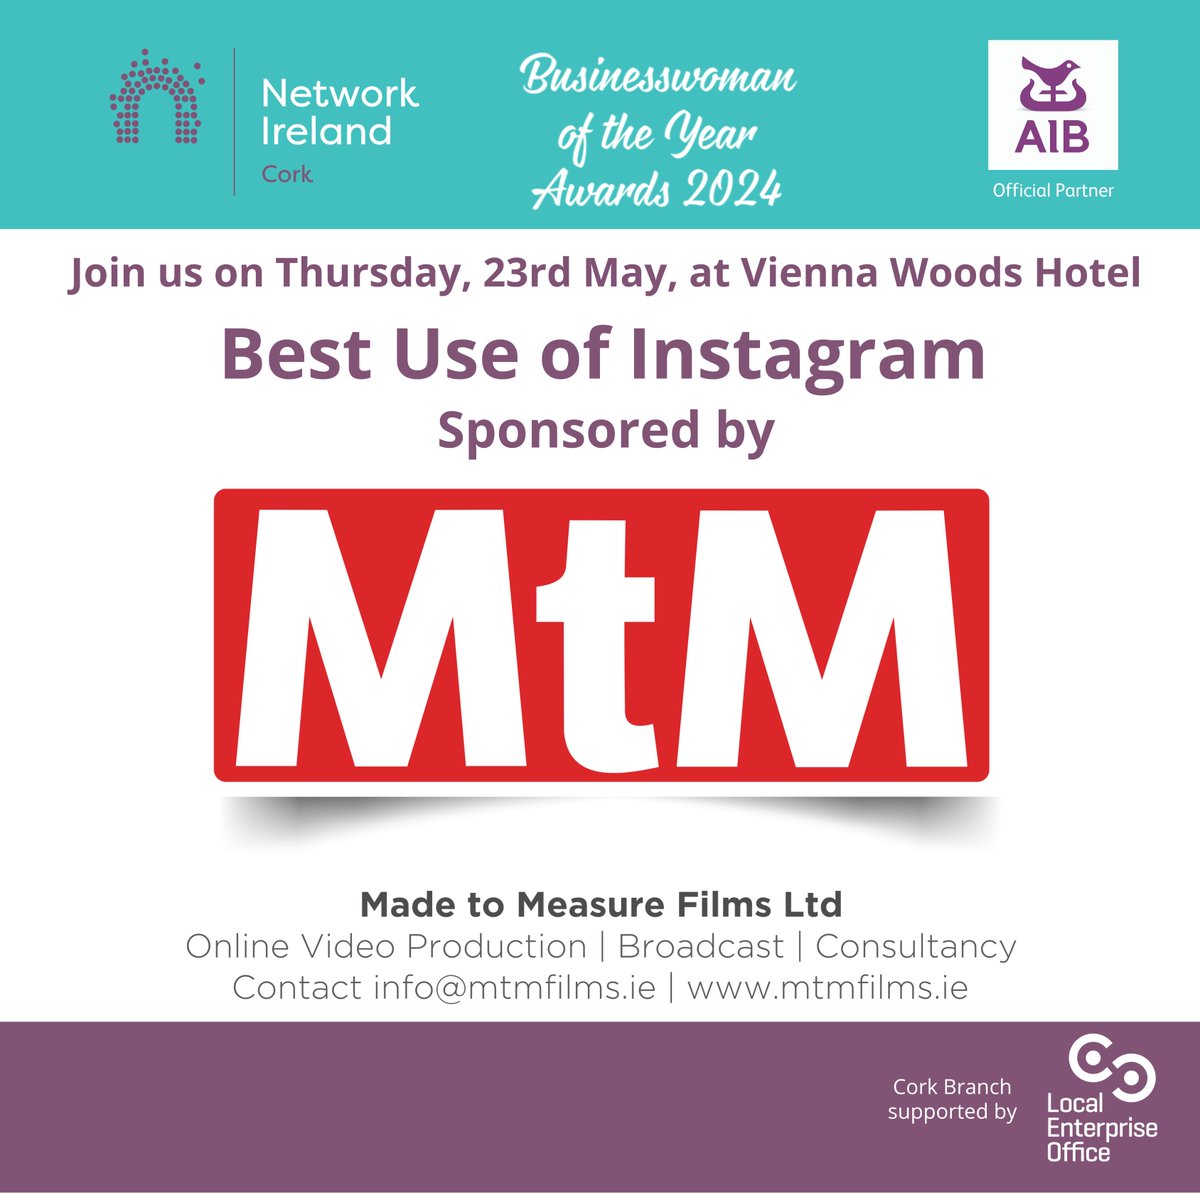 Thank you to our sponsor,@MtMfilmsLtd, for supporting the best use of Instagram on the night! ⏳One week until the 2024 Businesswoman of the Year Awards! Tickets close Sunday the 19th at MIDNIGHT: bit.ly/44hfBkv #NetworkIreland #NetworkCork #supportedbyAIB